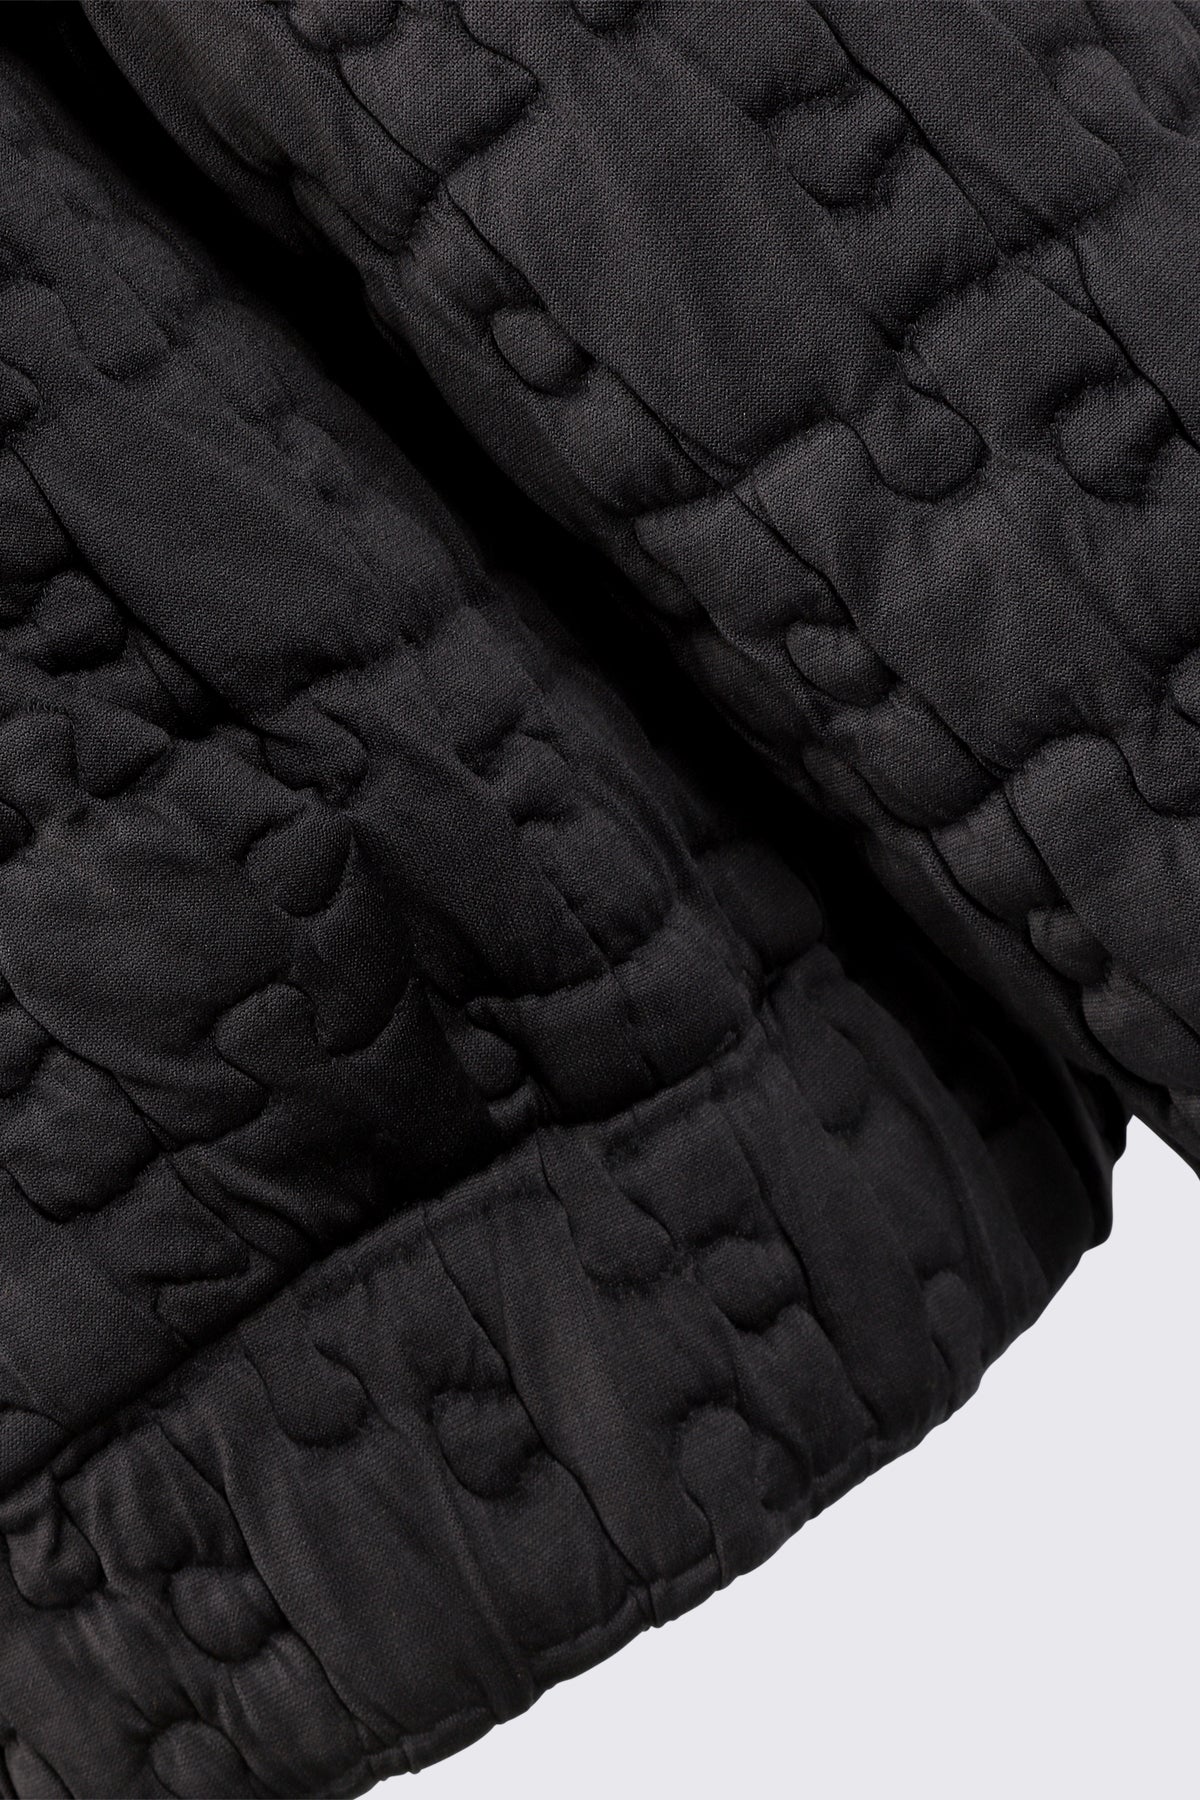 PUZZLE QUILTED HOODIE | BLACK PUZZLE